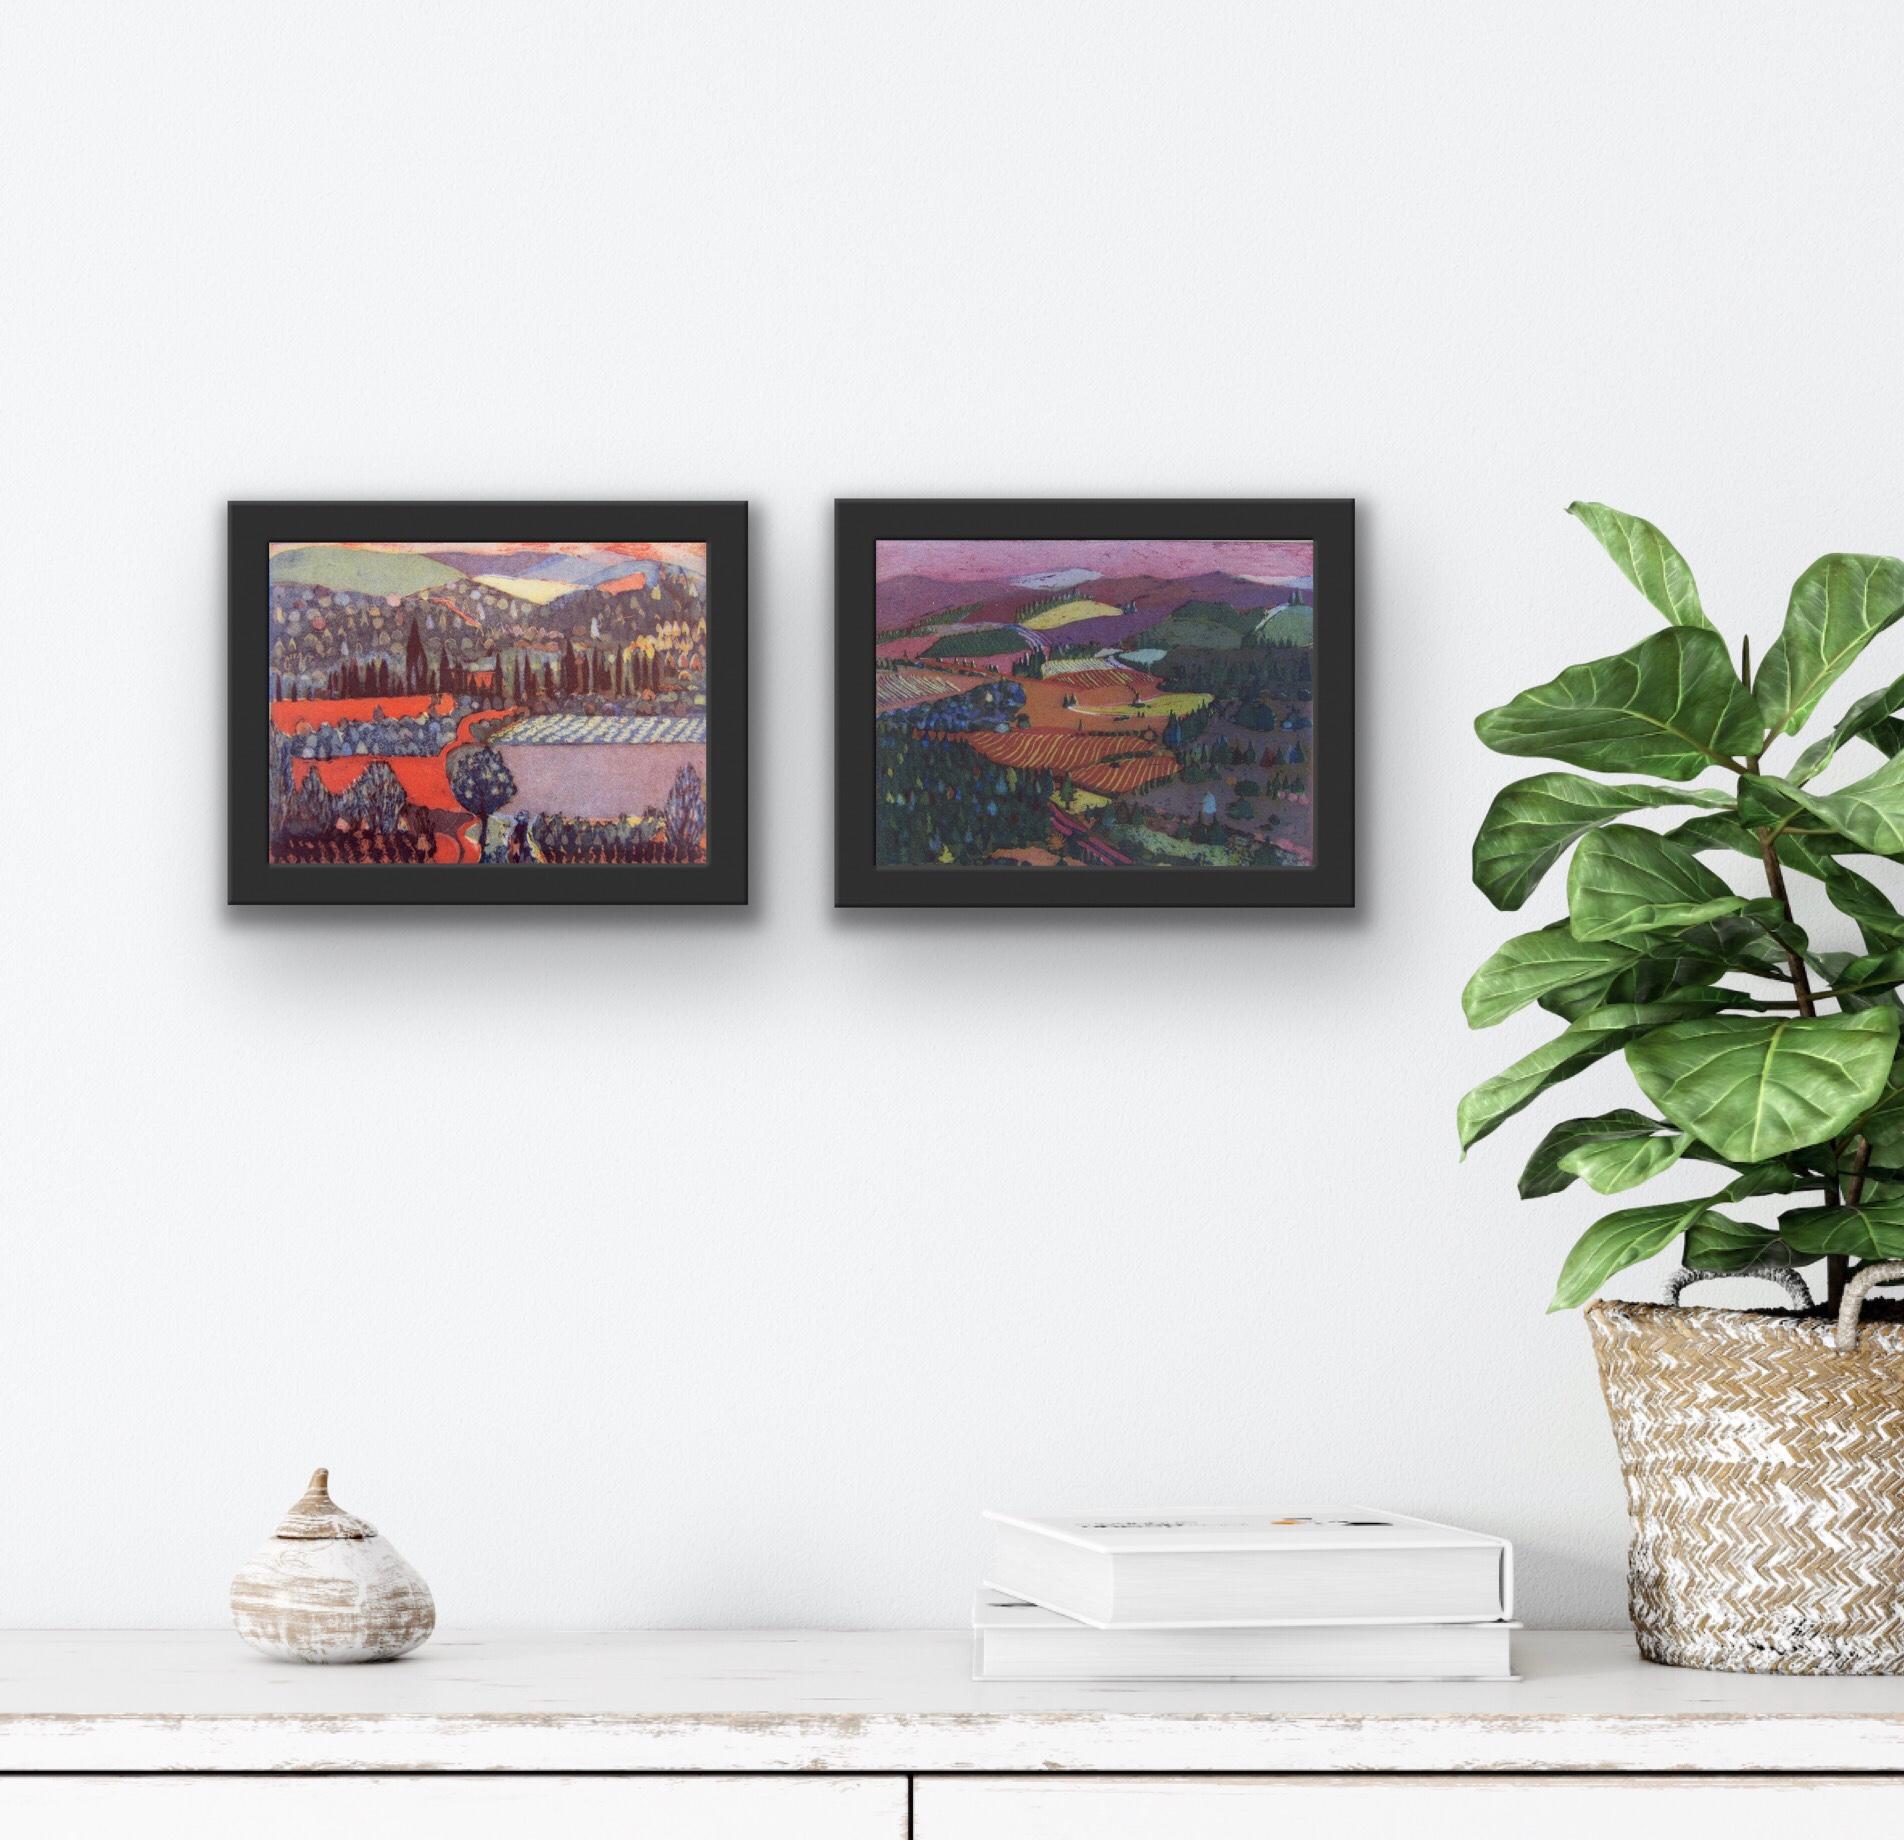 Over the Hill and Far Away and Magenta Sky diptych - Print by Karen Keogh